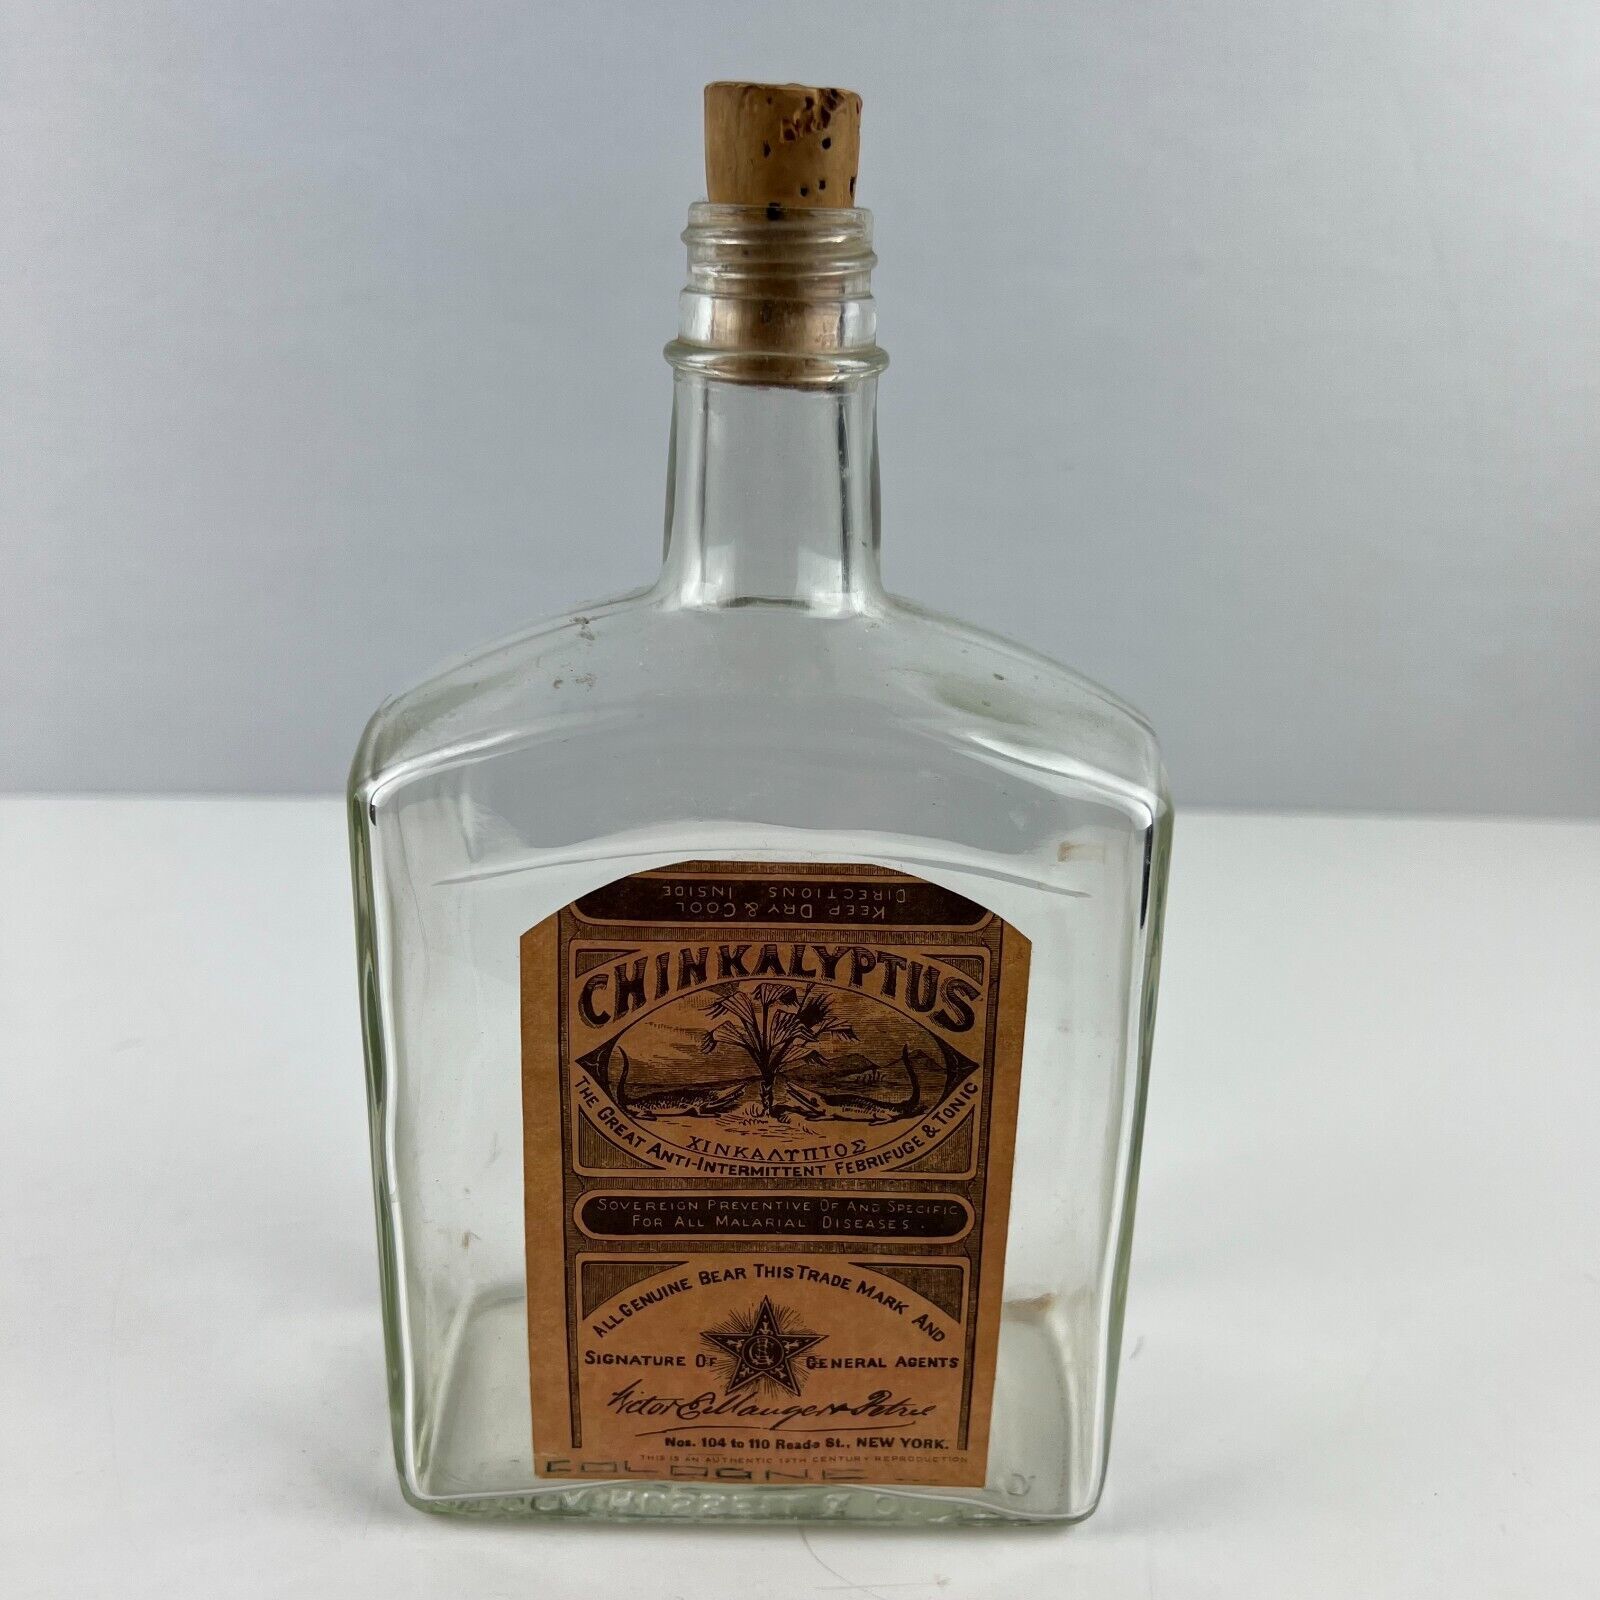 Primary image for Chinkalyptus Cologne Vintage Label Decoupage Cock Russell London Liquor Bottle